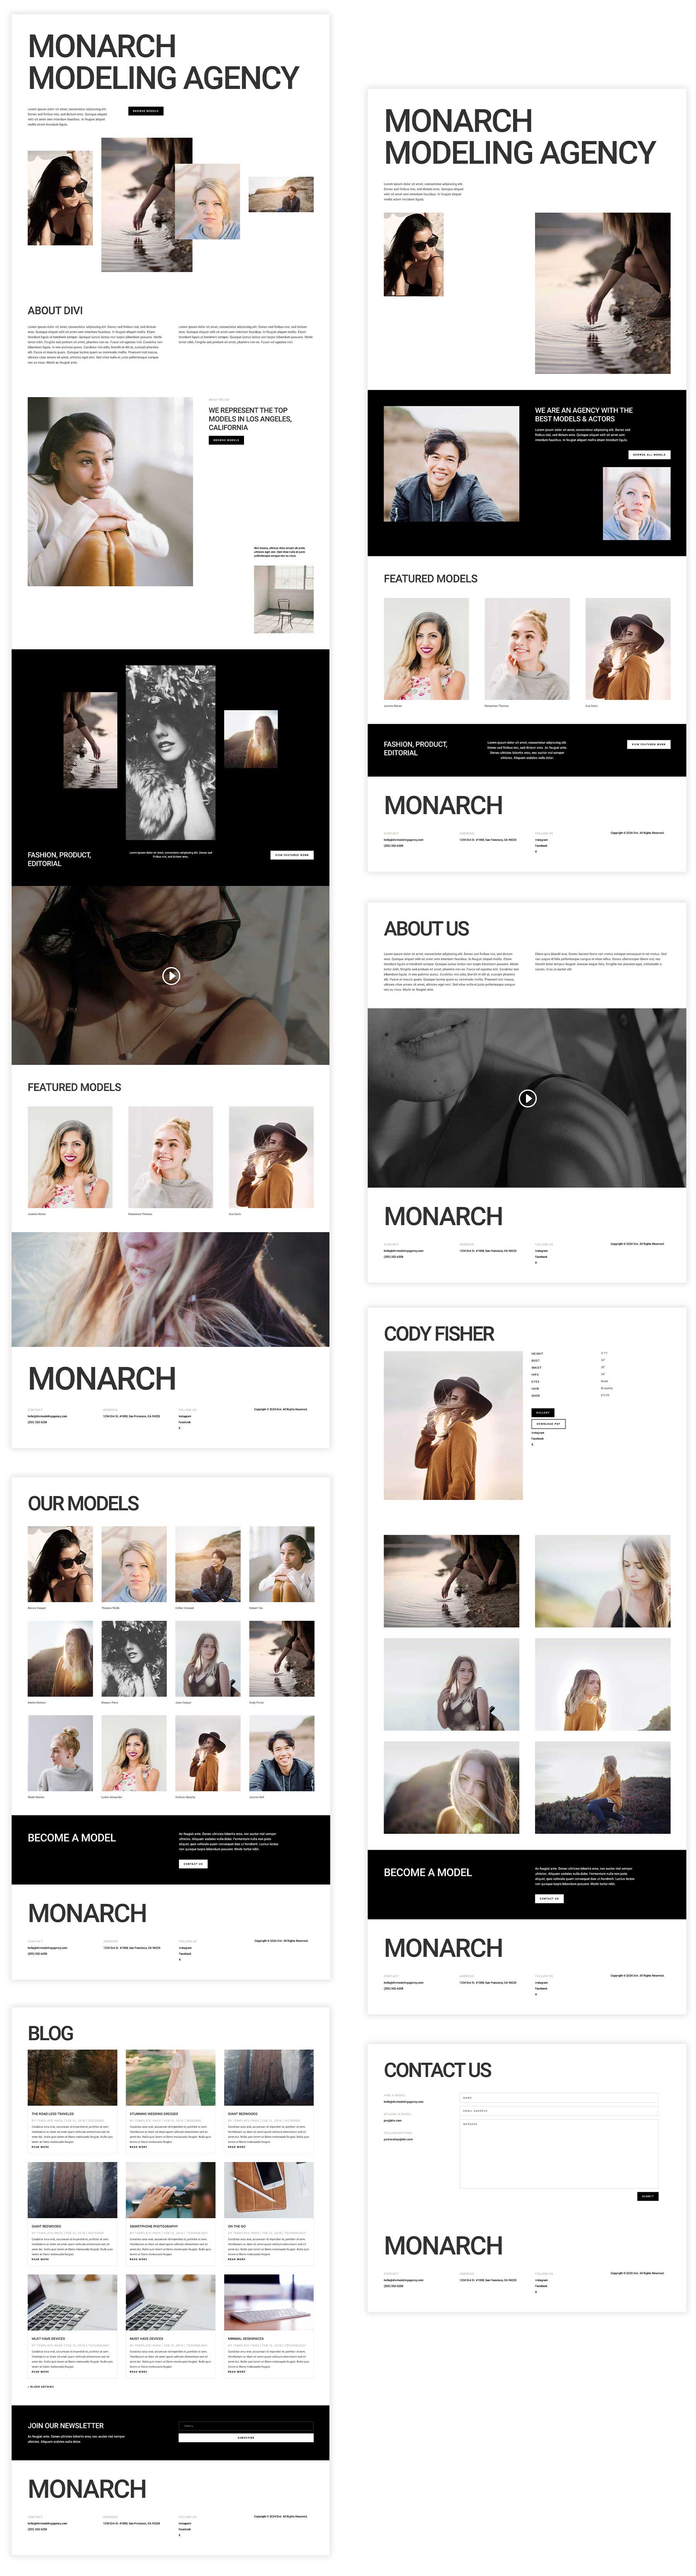 Modeling Agency layout pack